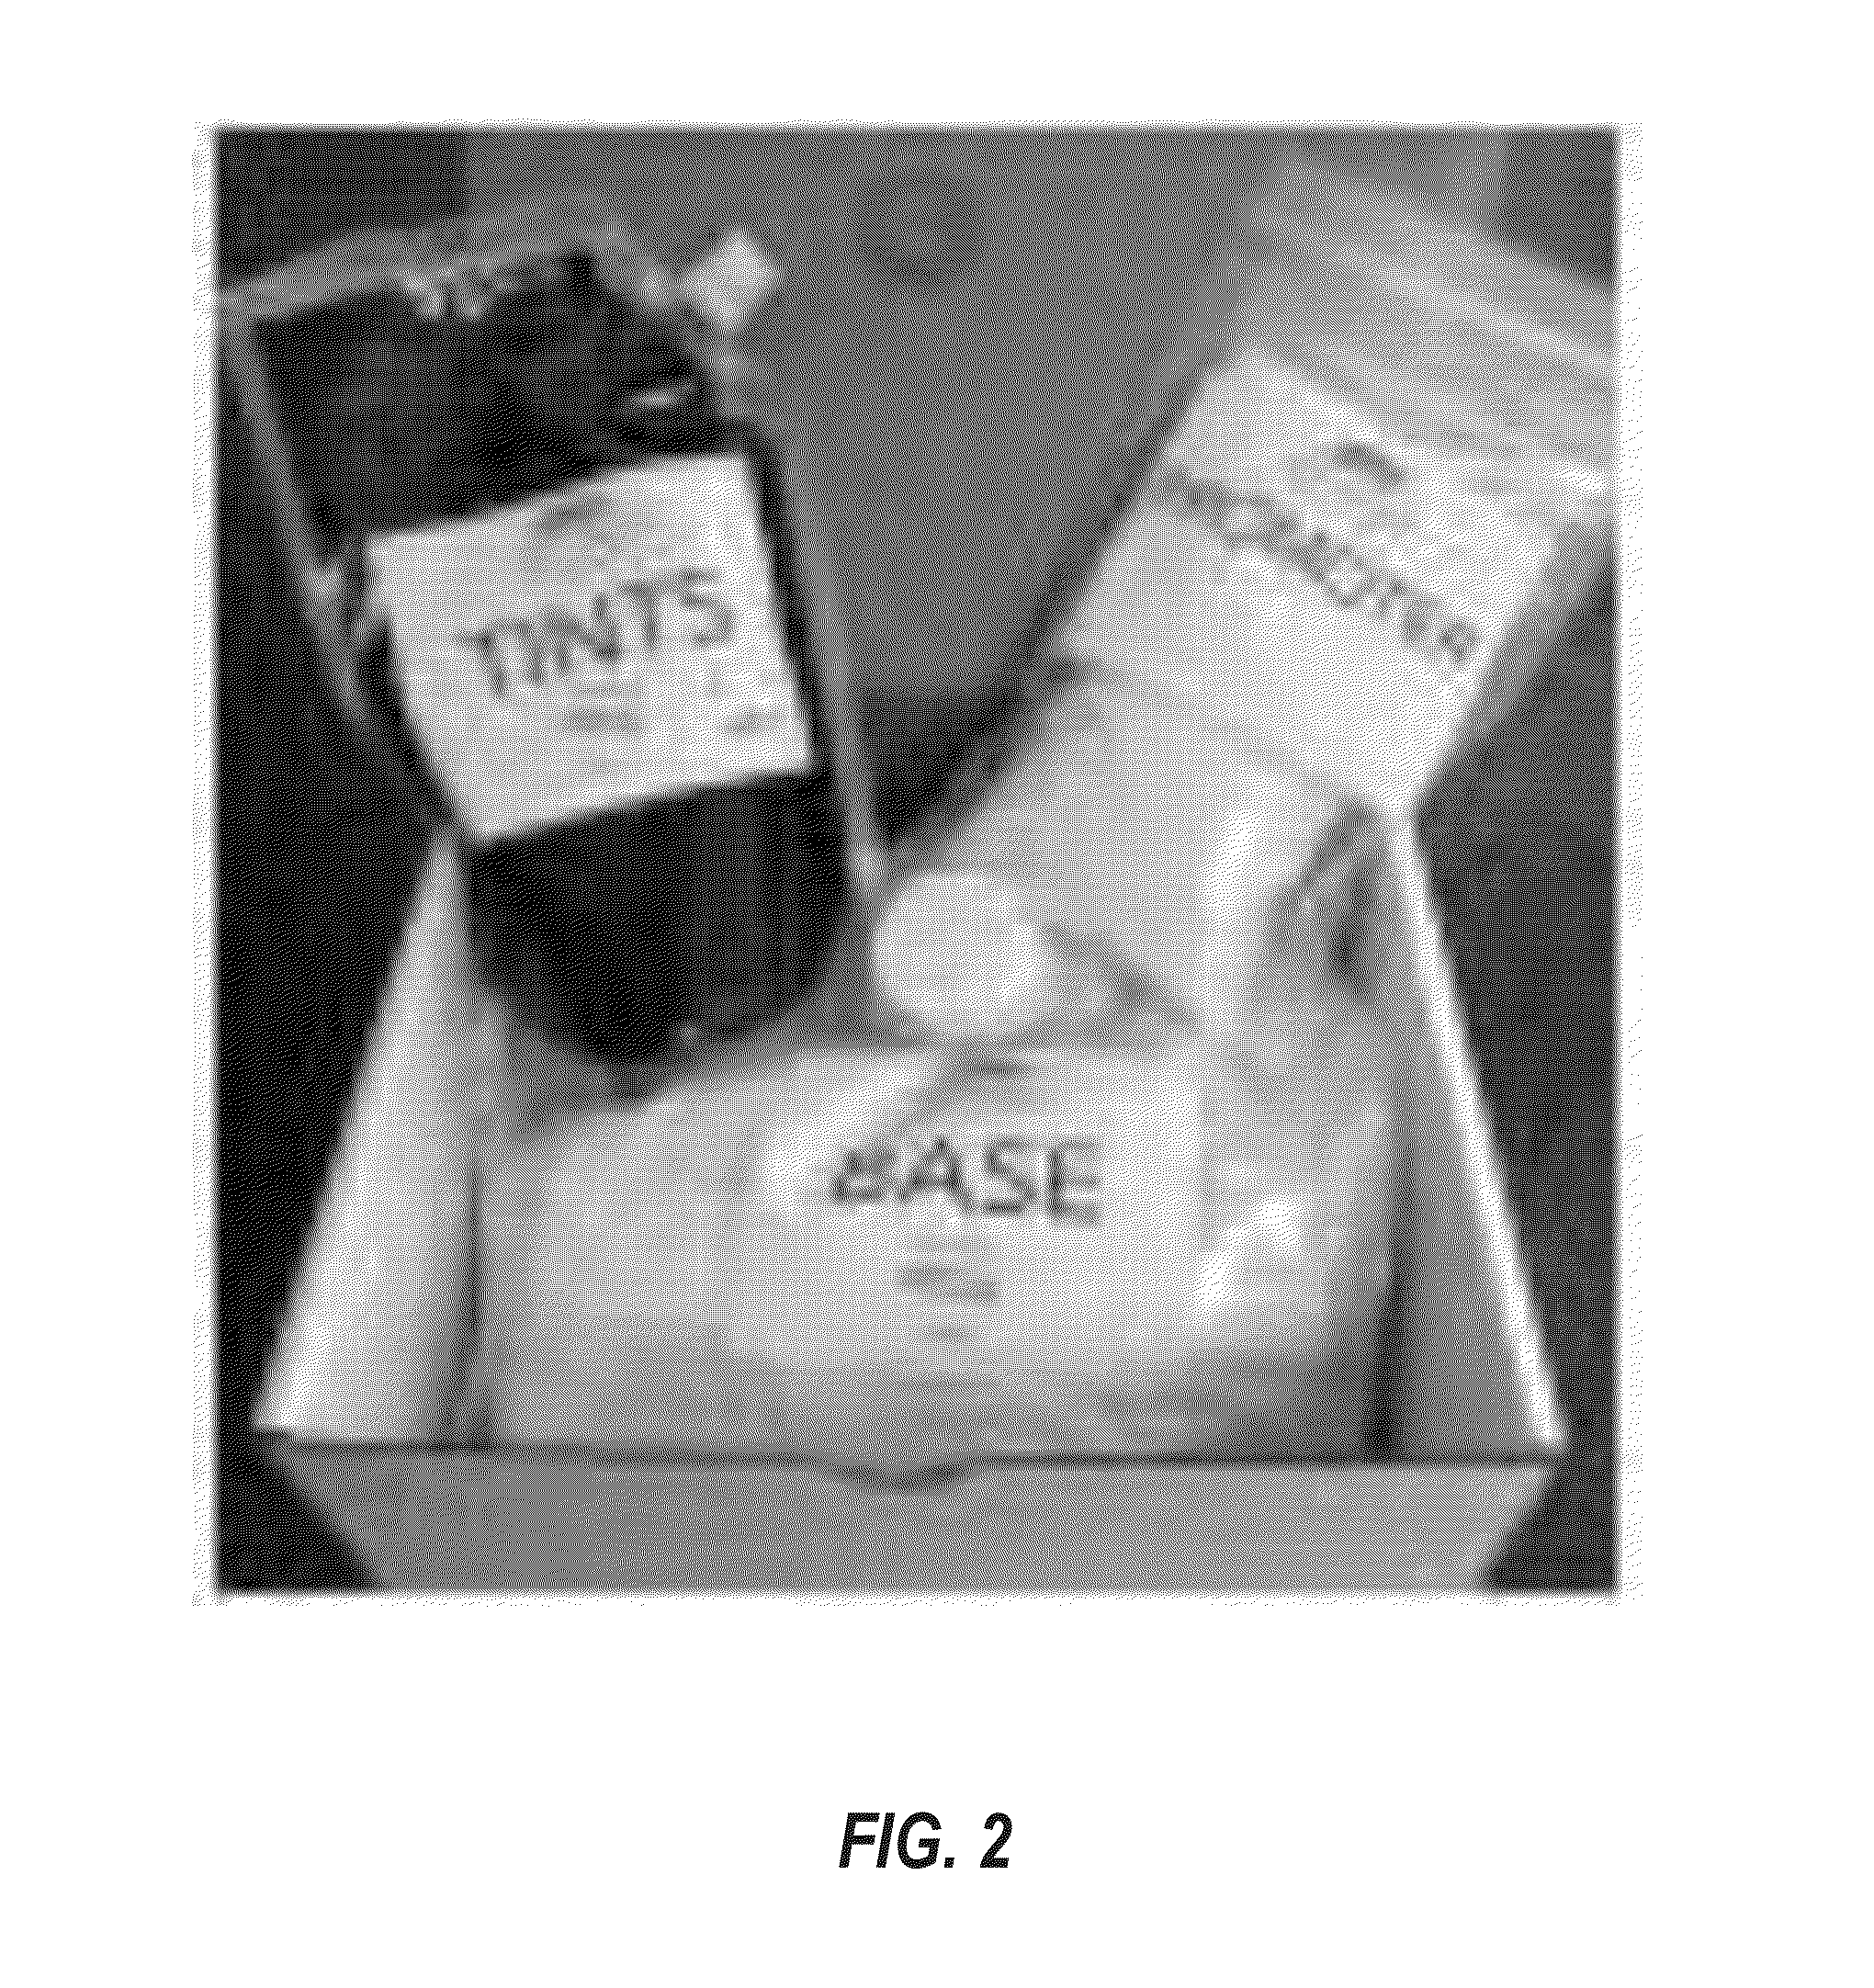 Substrate stain compositions and methods of application